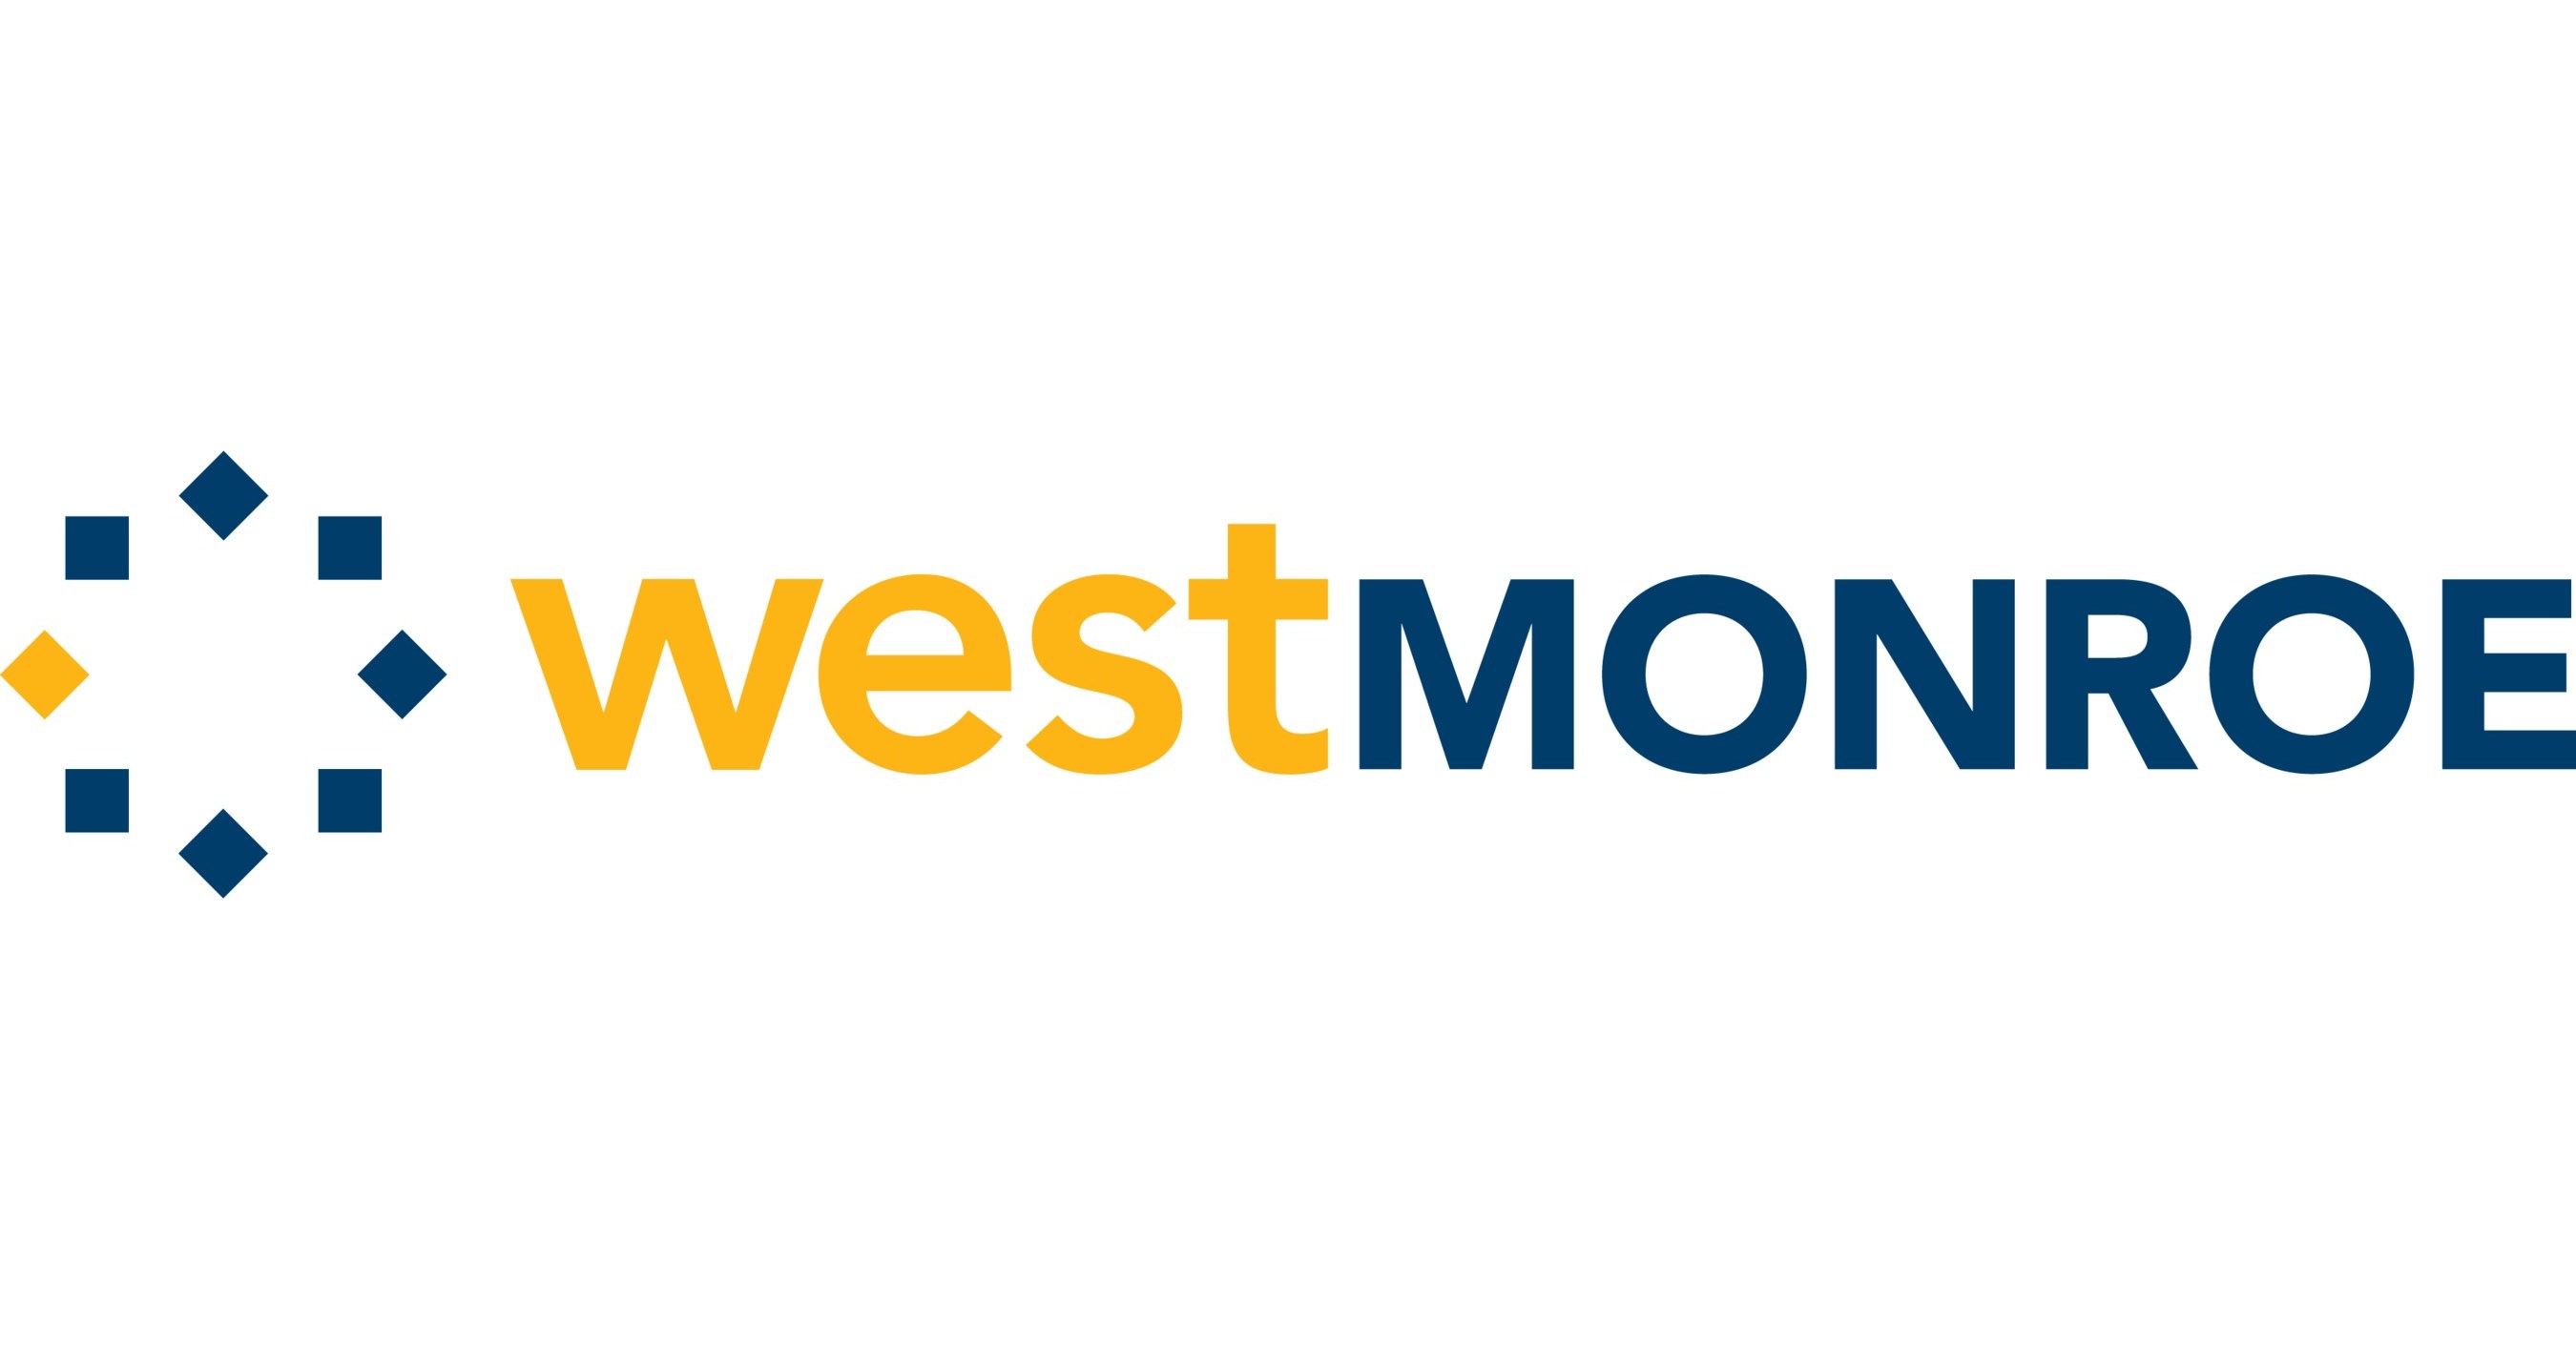 West Monroe announces investment in European expansion, starts by opening office in London